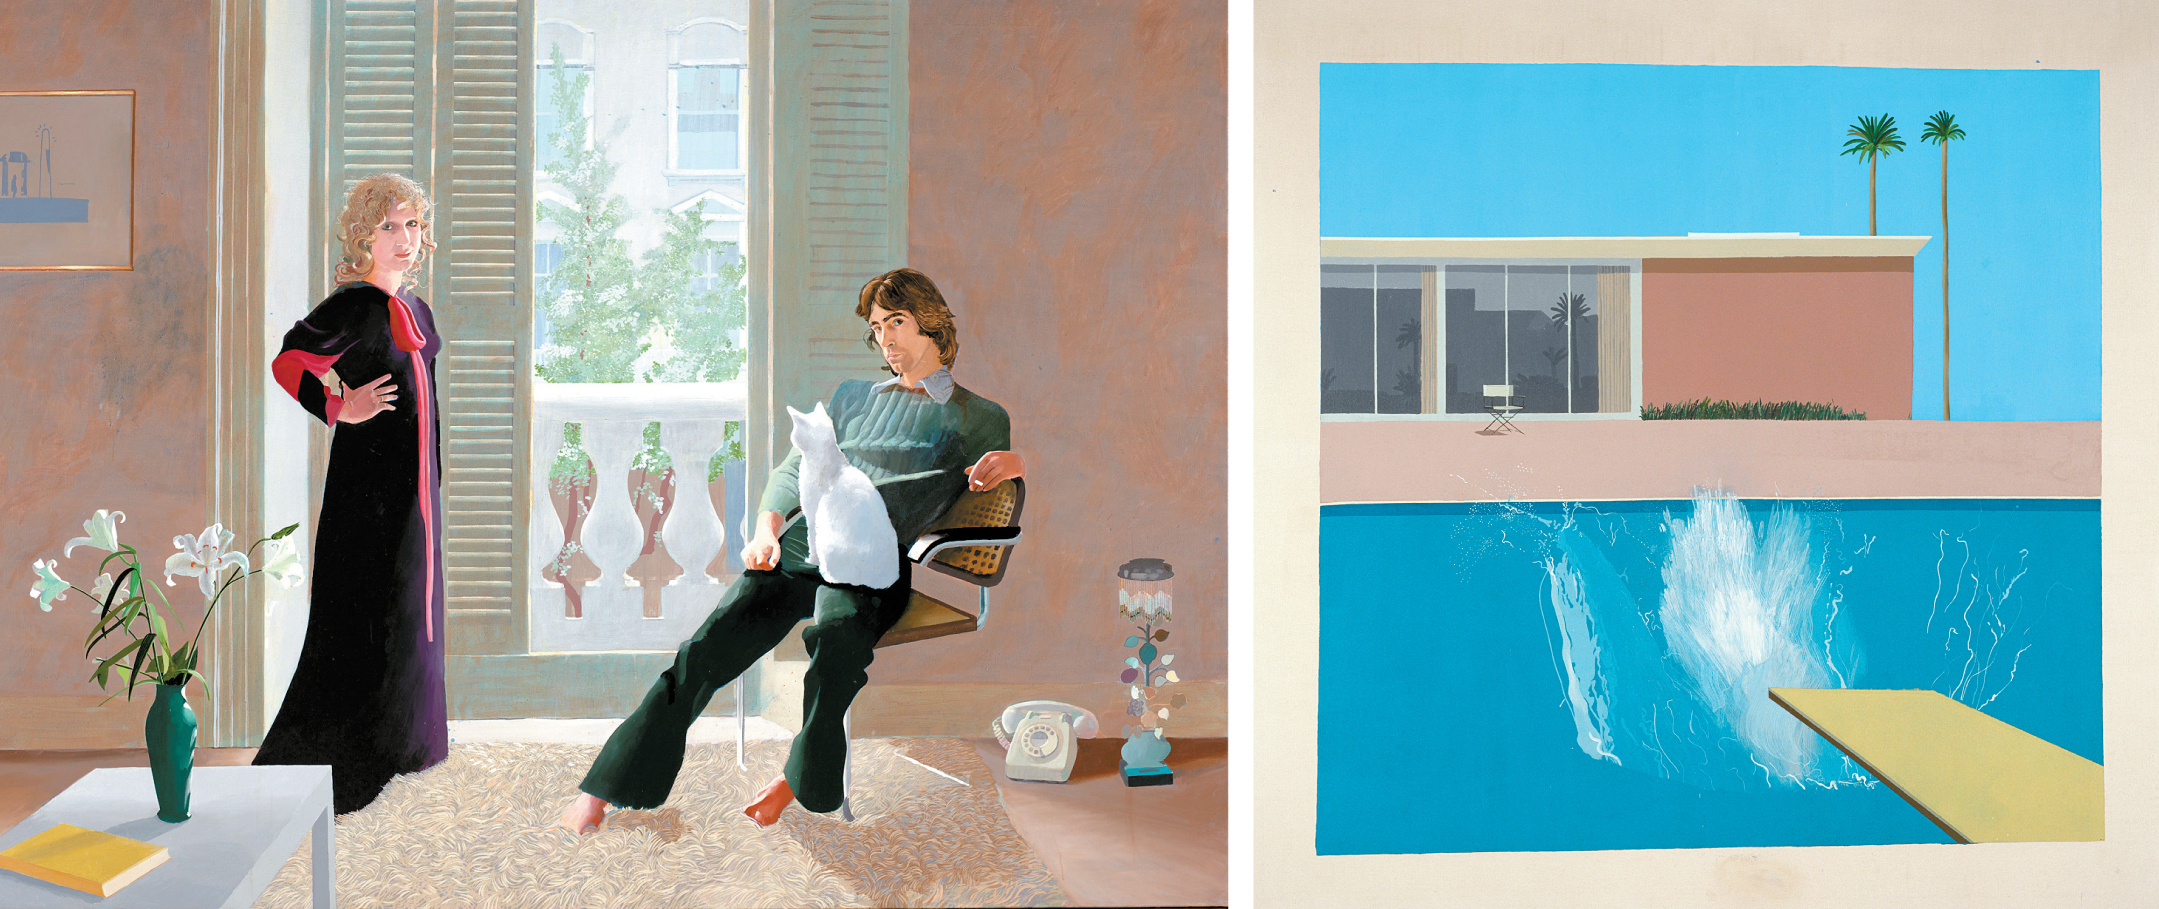 David Hockney exhibit follows artist’s career: Works from the Tate